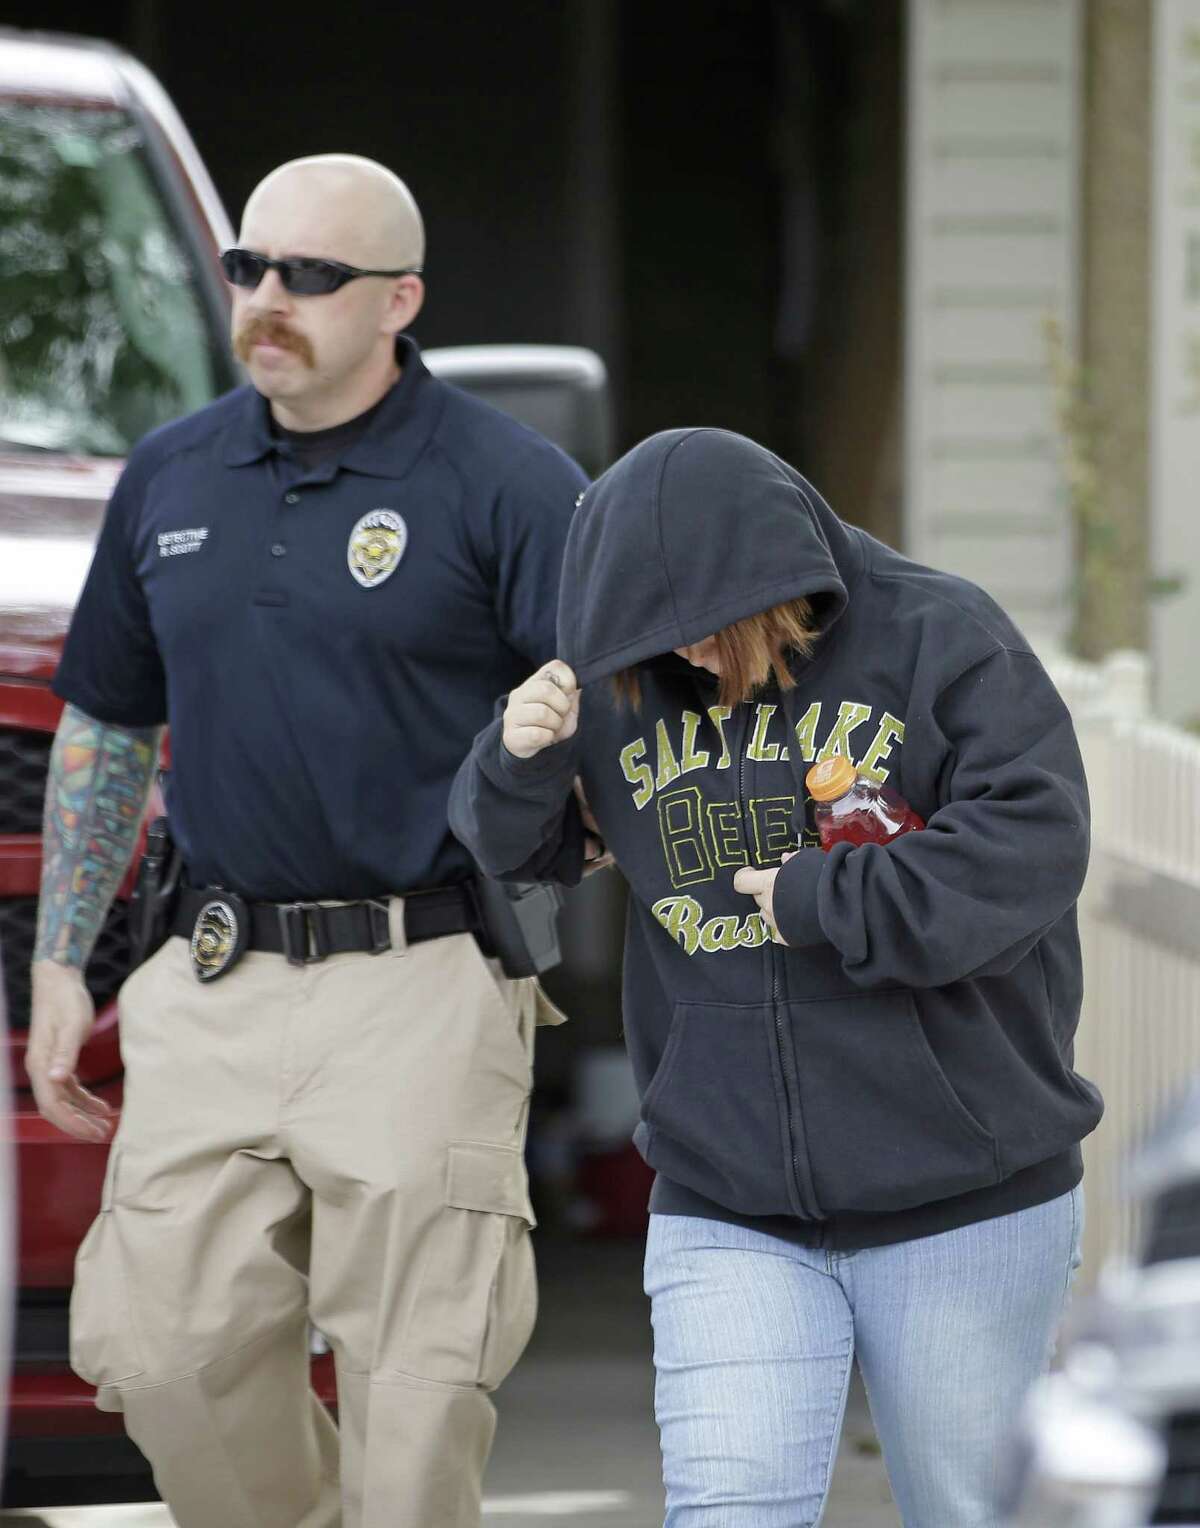 A unidentified woman is escorted from a home by a police officer after a baby was found in a garbage can in Kearns, Utah on Tuesday, Aug. 26, 2014.